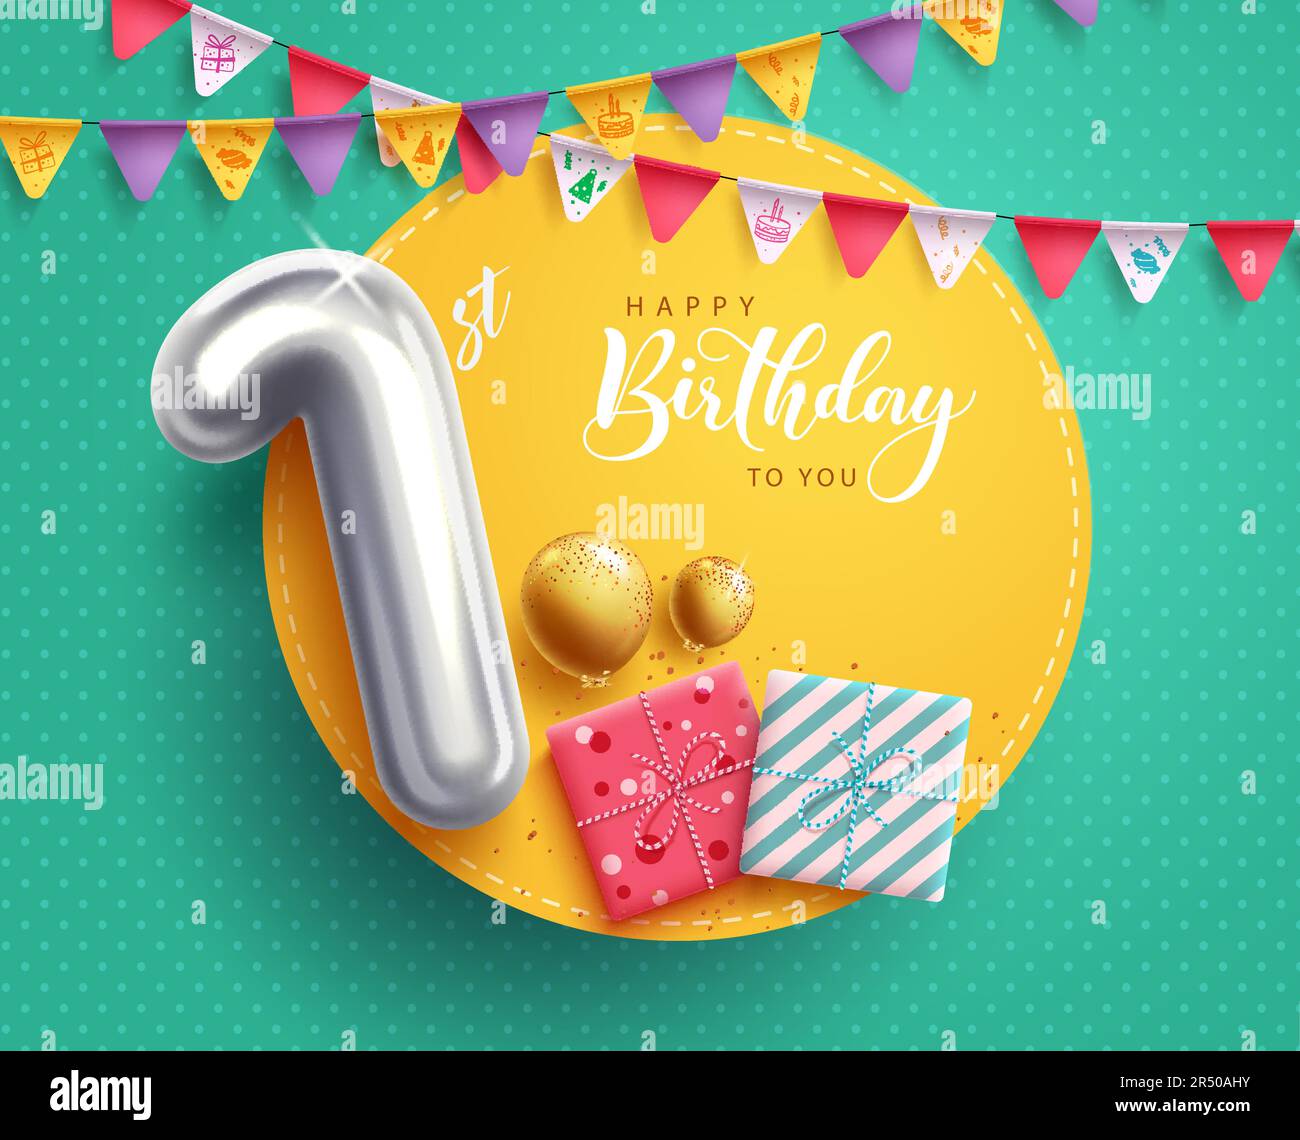 1 year birthday card Banque d'images vectorielles - Alamy